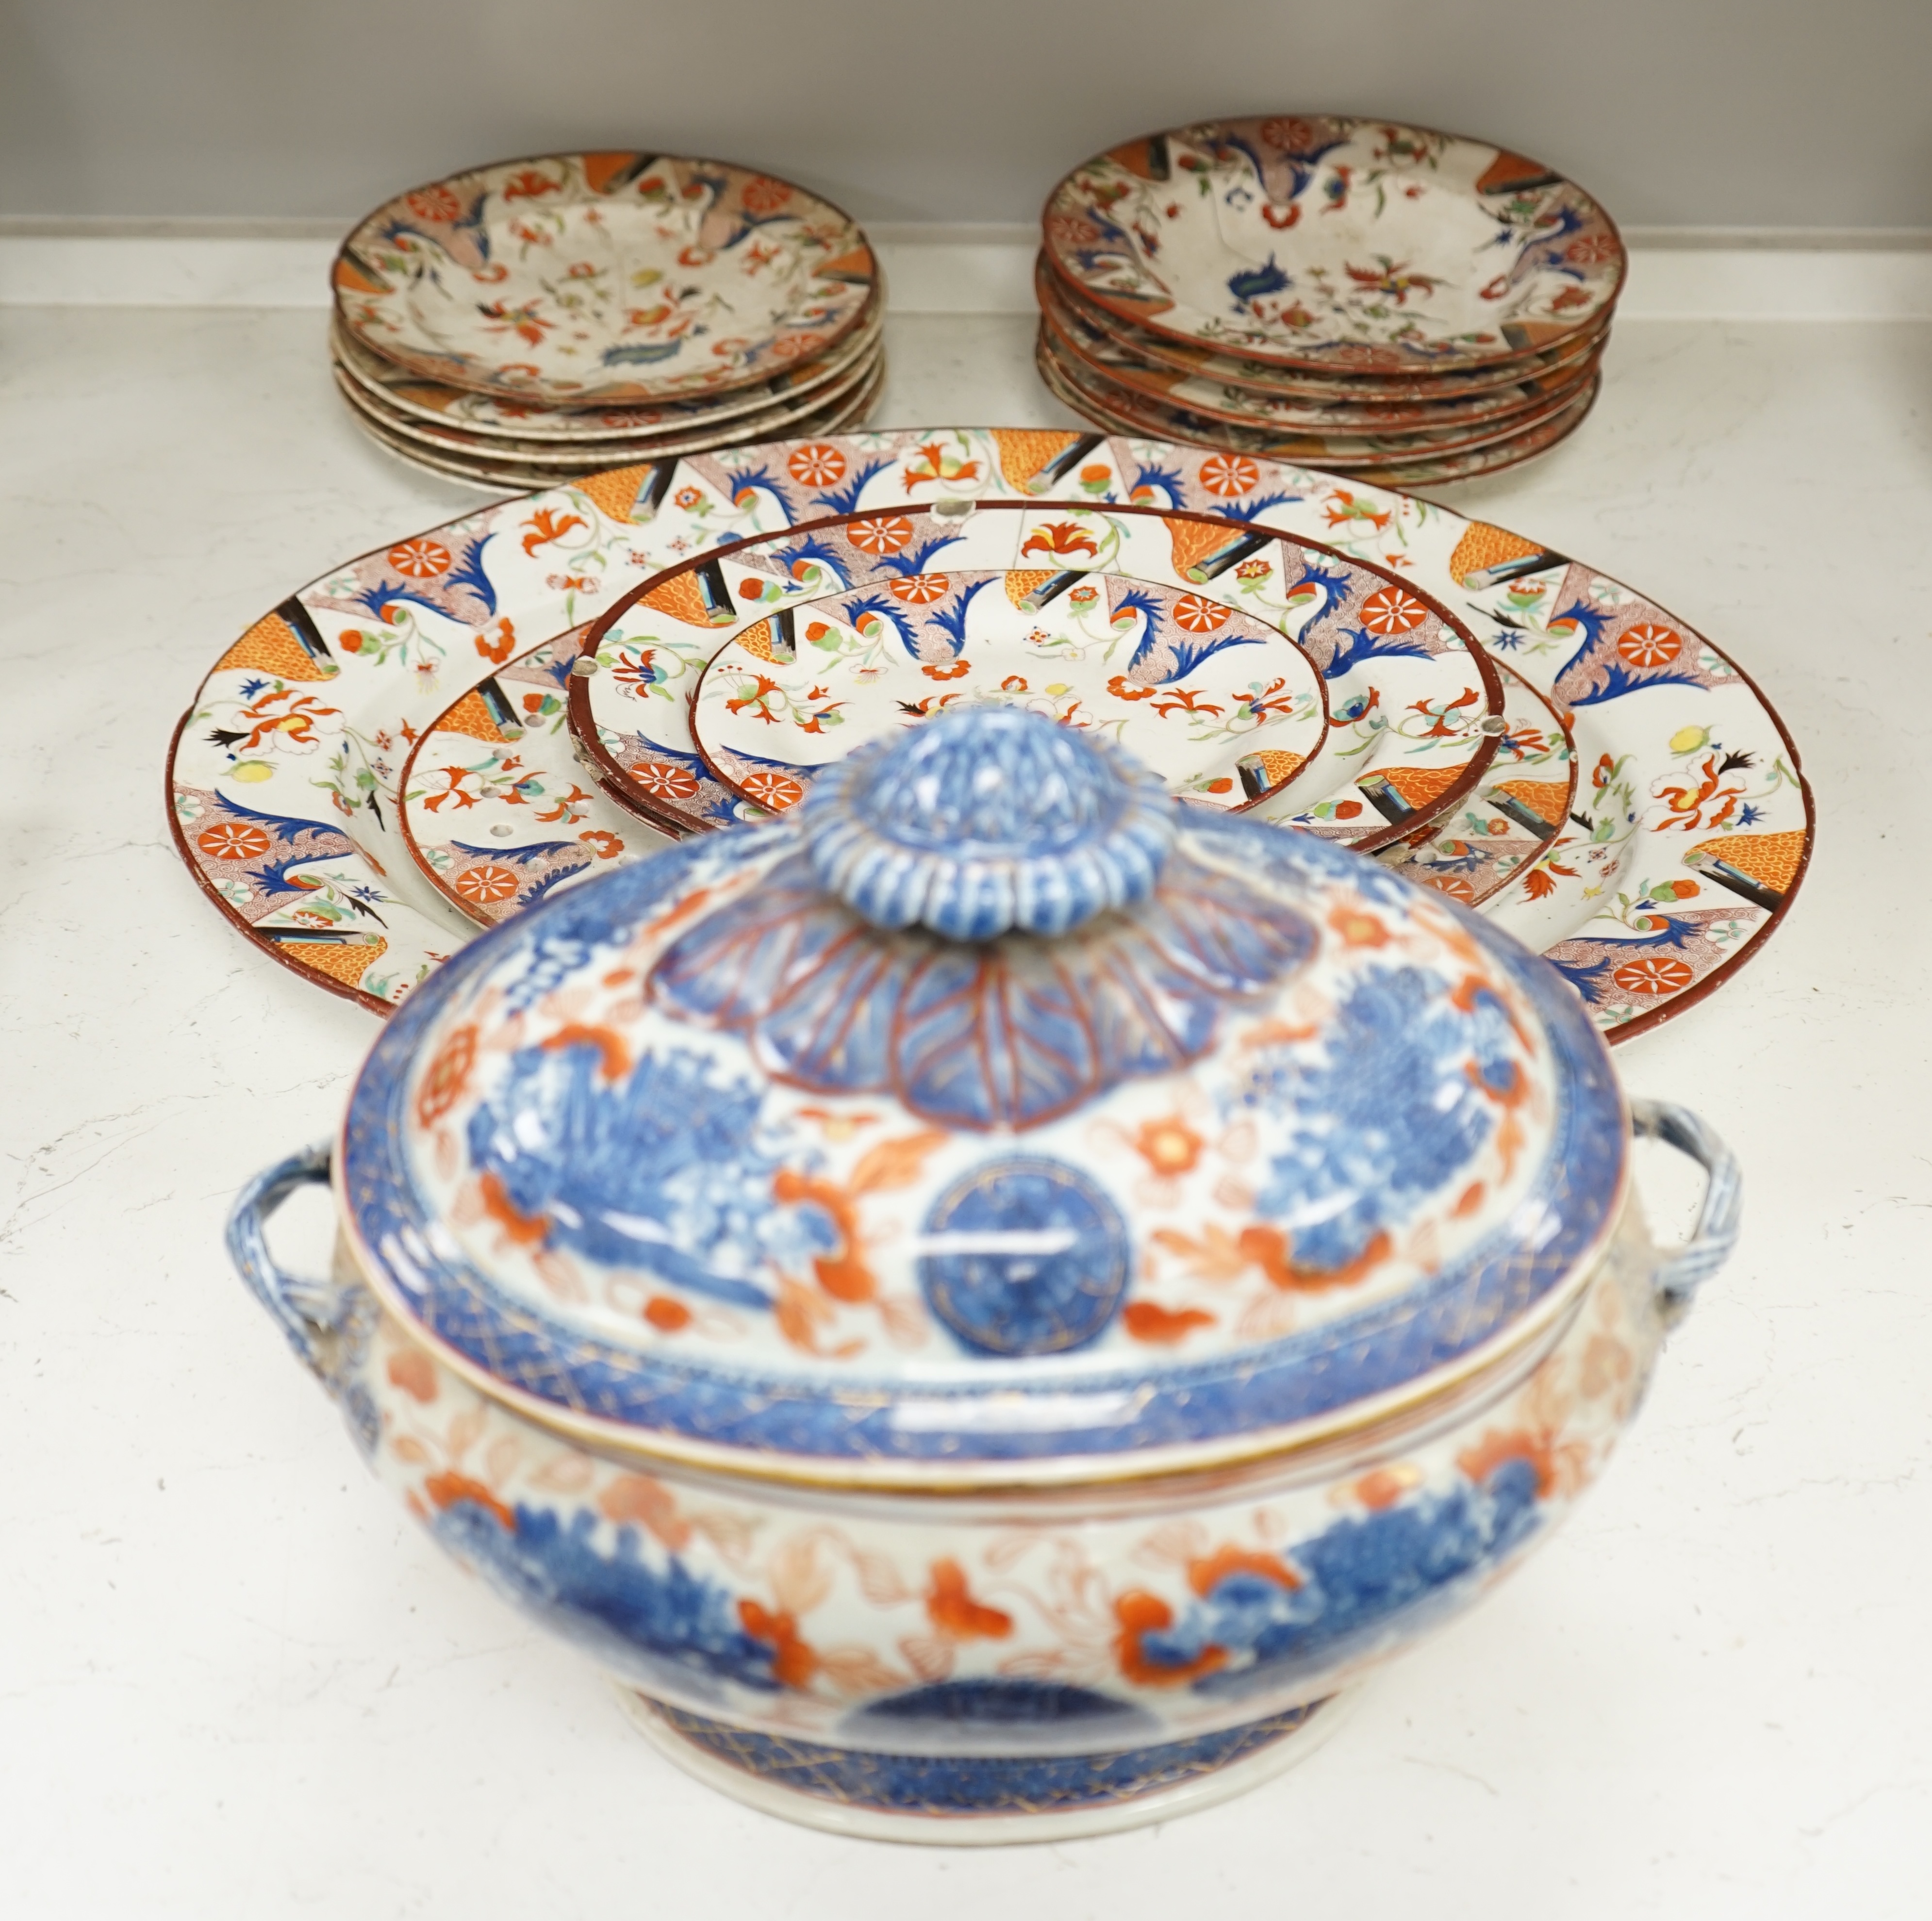 A Chinese export Imari pattern tureen and cover, Qianlong period, collection of Victorian plates and dishes together with an Imari pattern tureen and cover